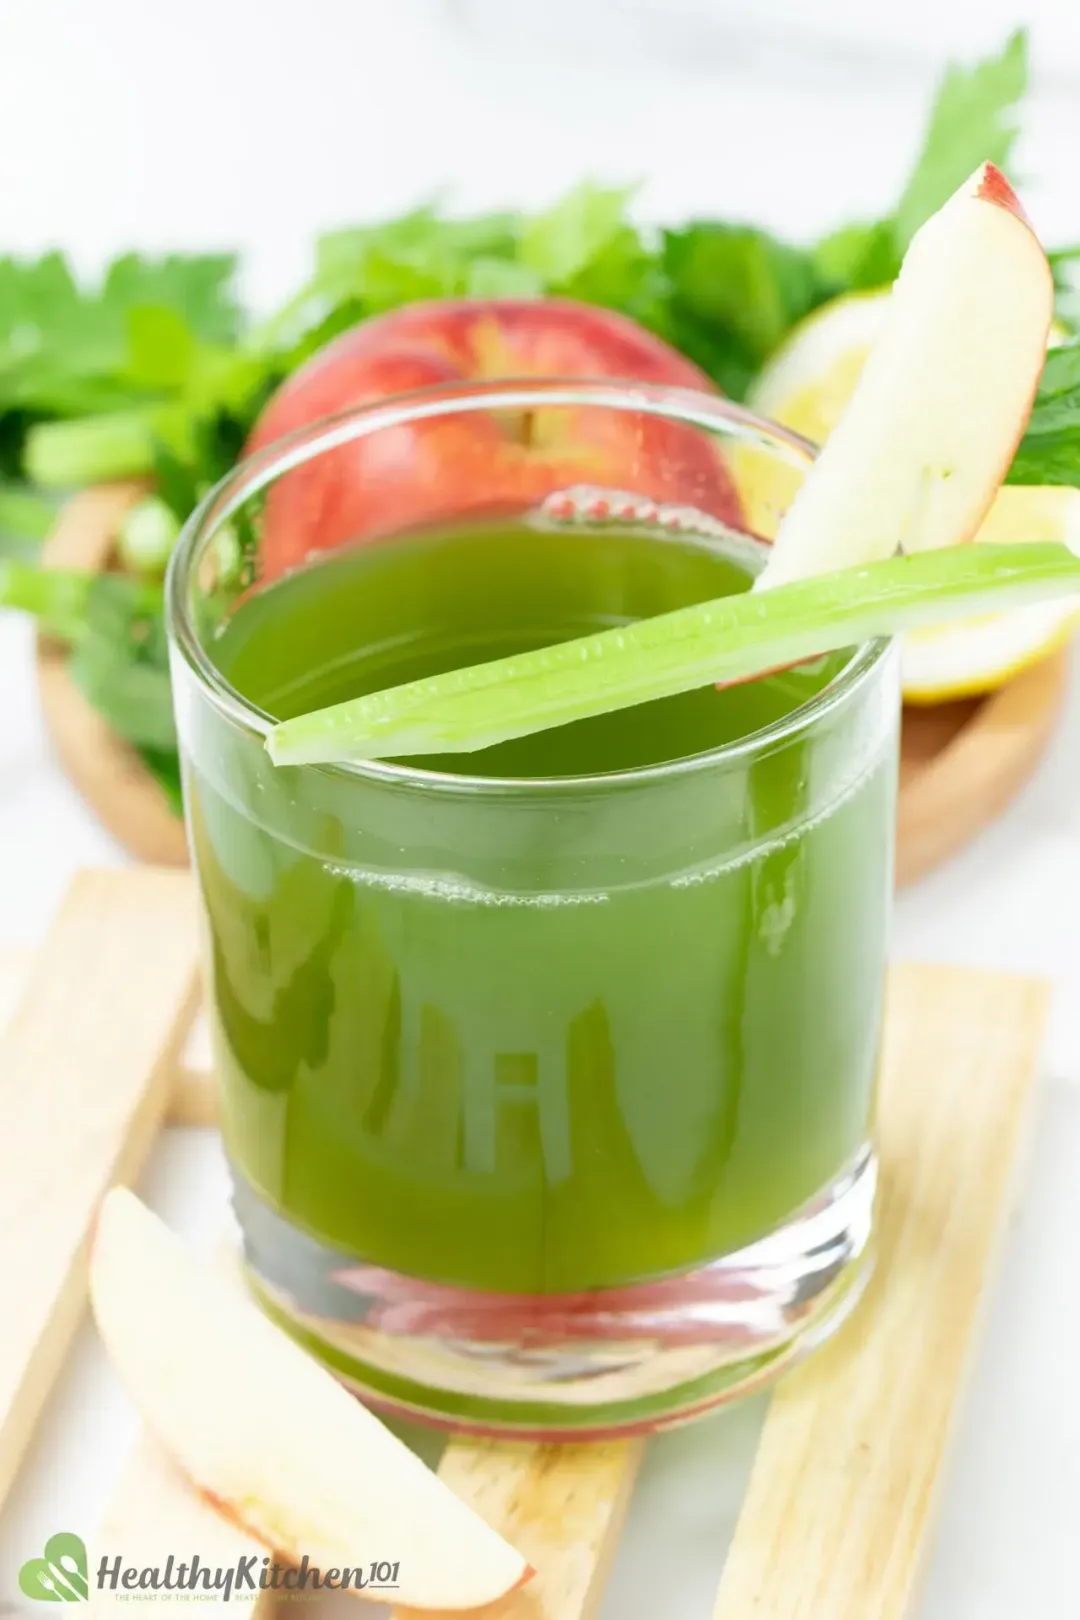 A glass of celery juice with an apple wedge and a celery stalk on the rim, garnished with celery leaves